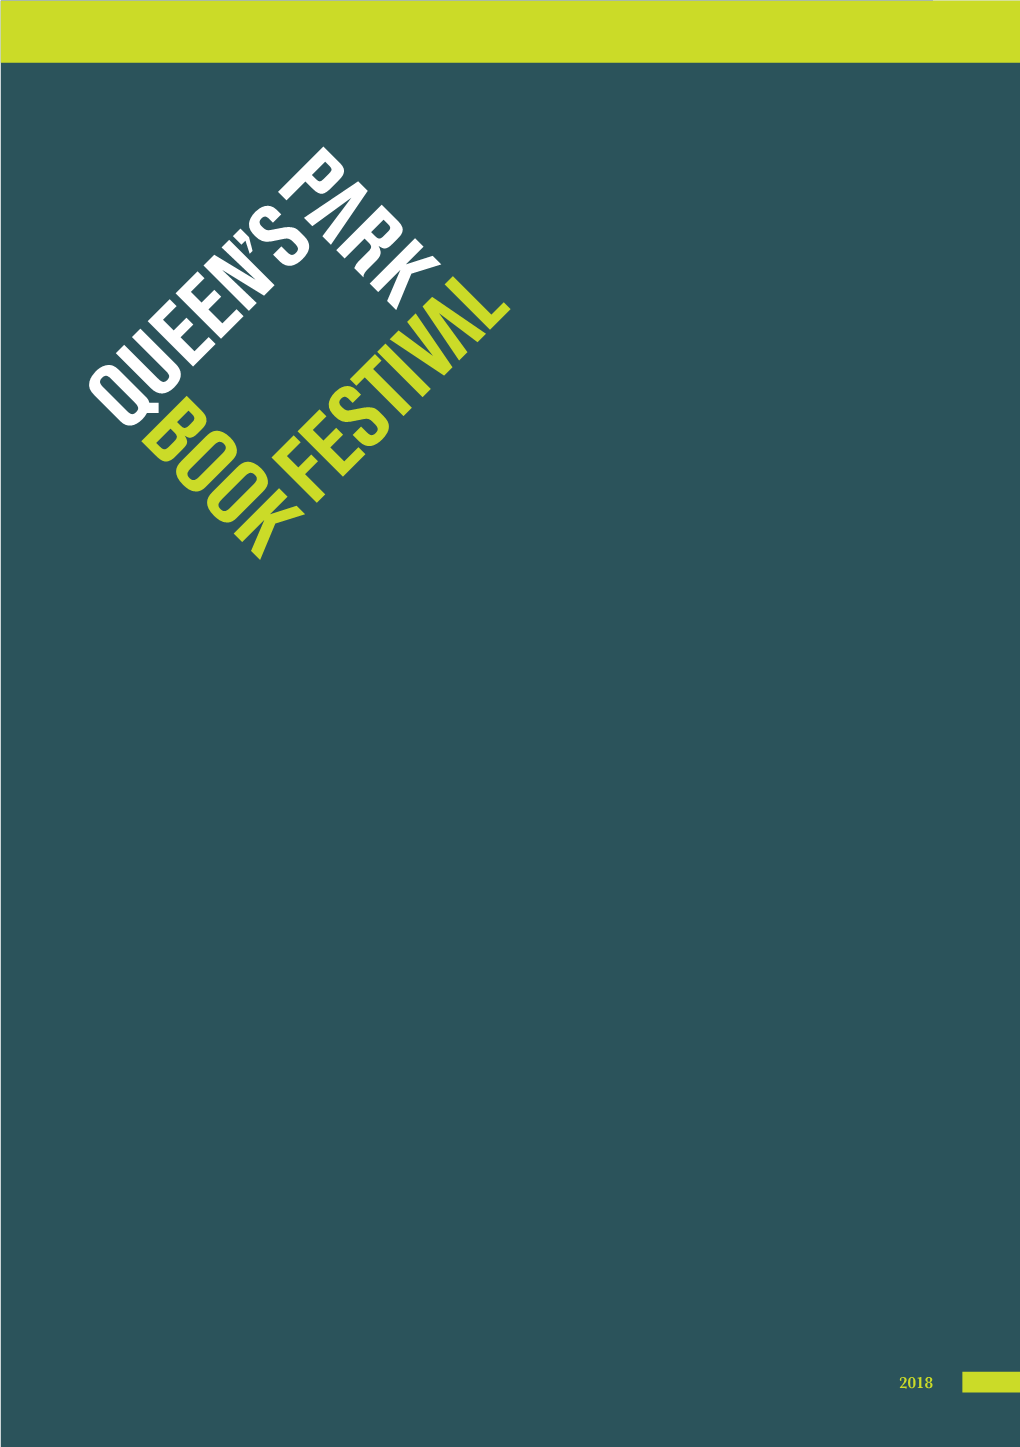 2018 1 Sold on Queen’S Park Book Festival